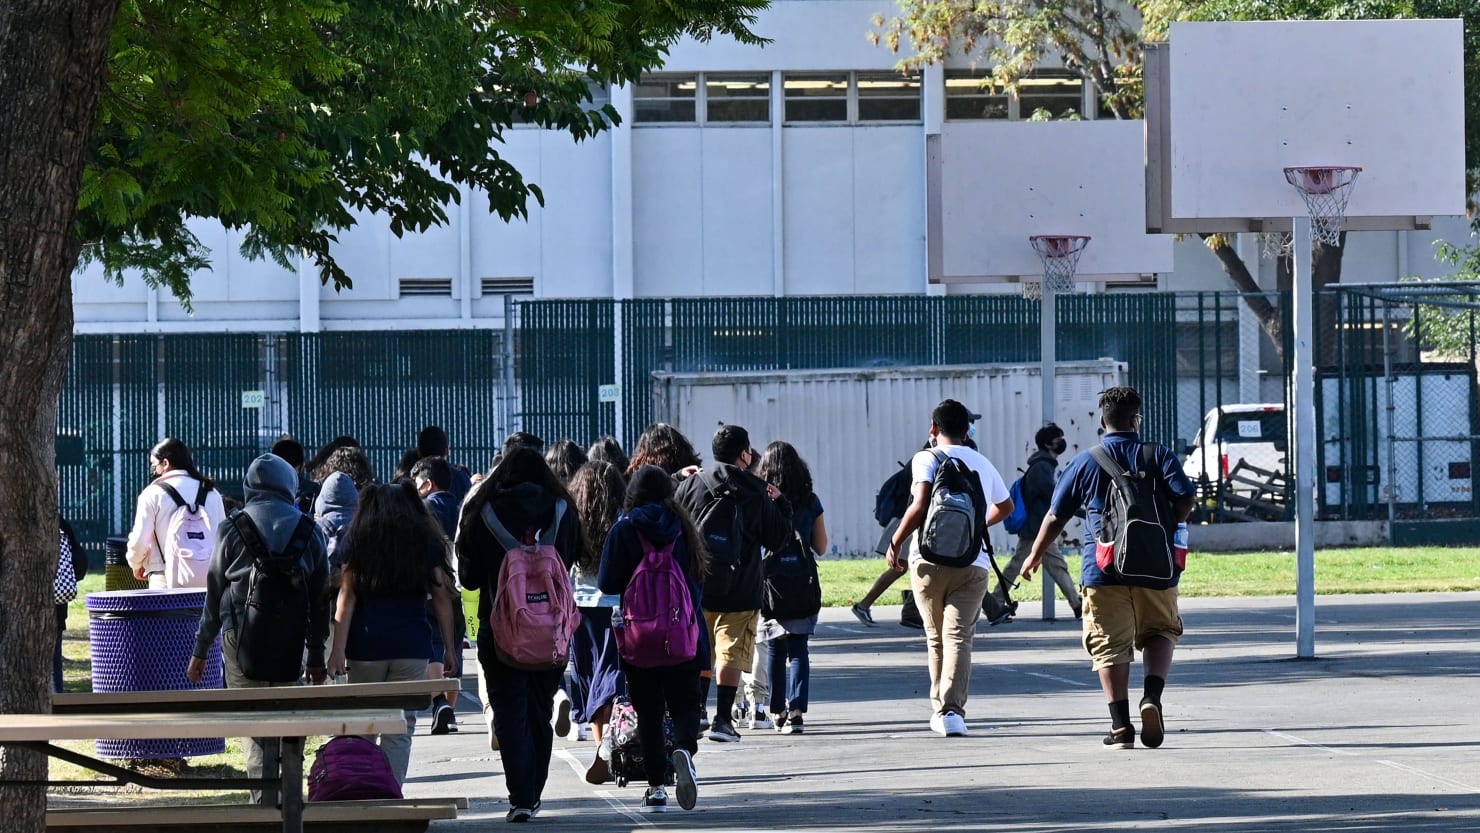 Chaos at Carter High School in Rialto, California Over Claims Vice Principals Ignored Students Sex Assaults